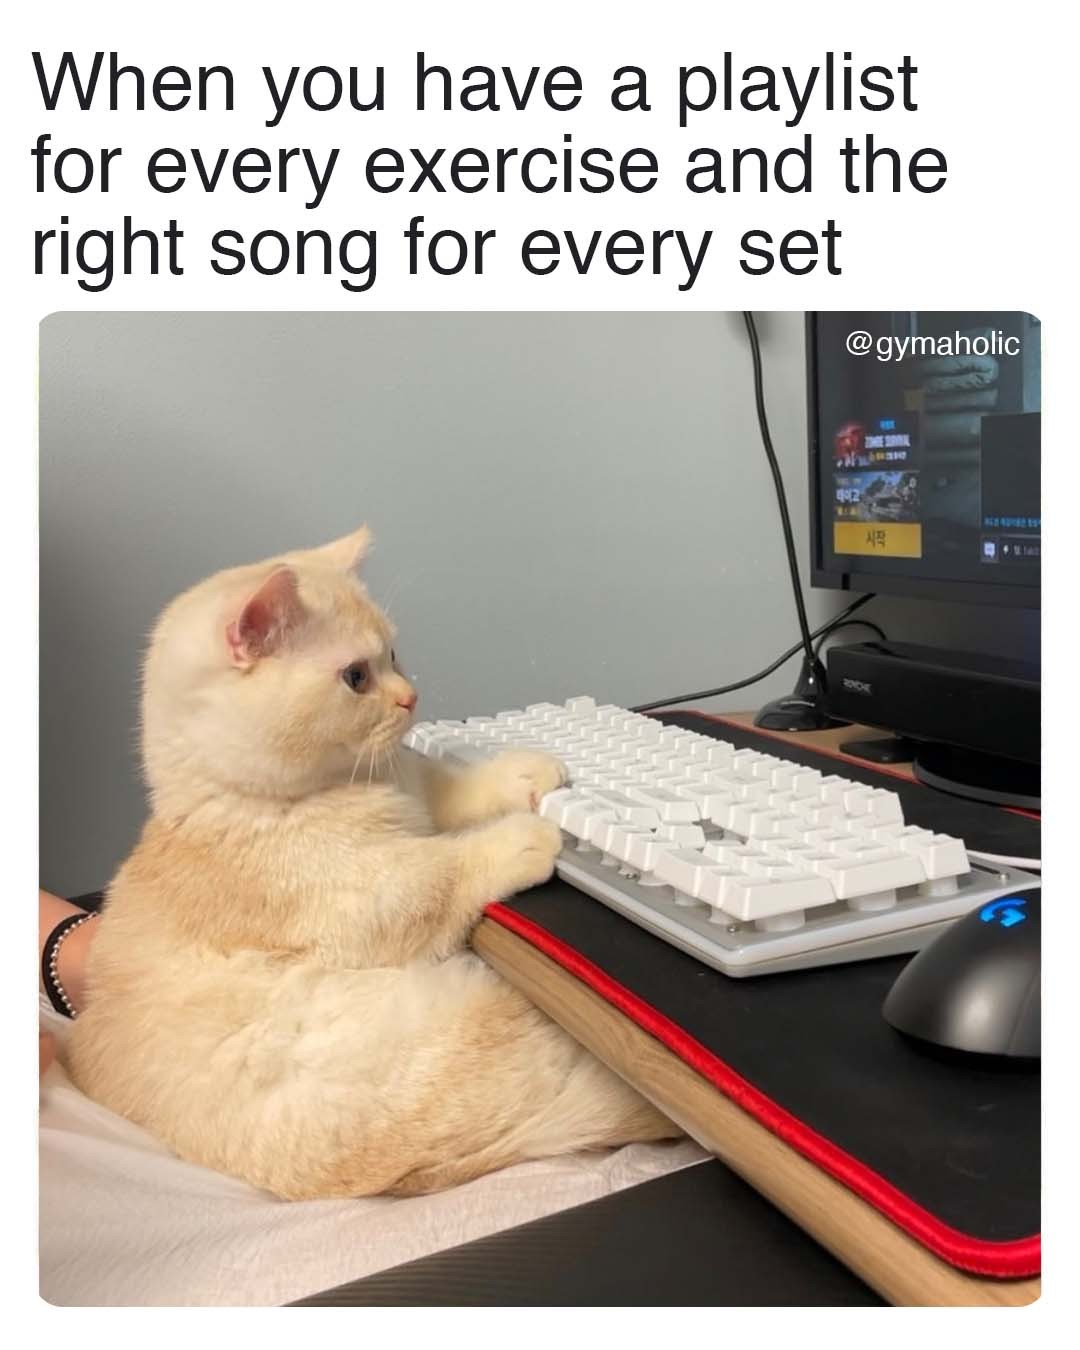 When you have a playlist for every exercise